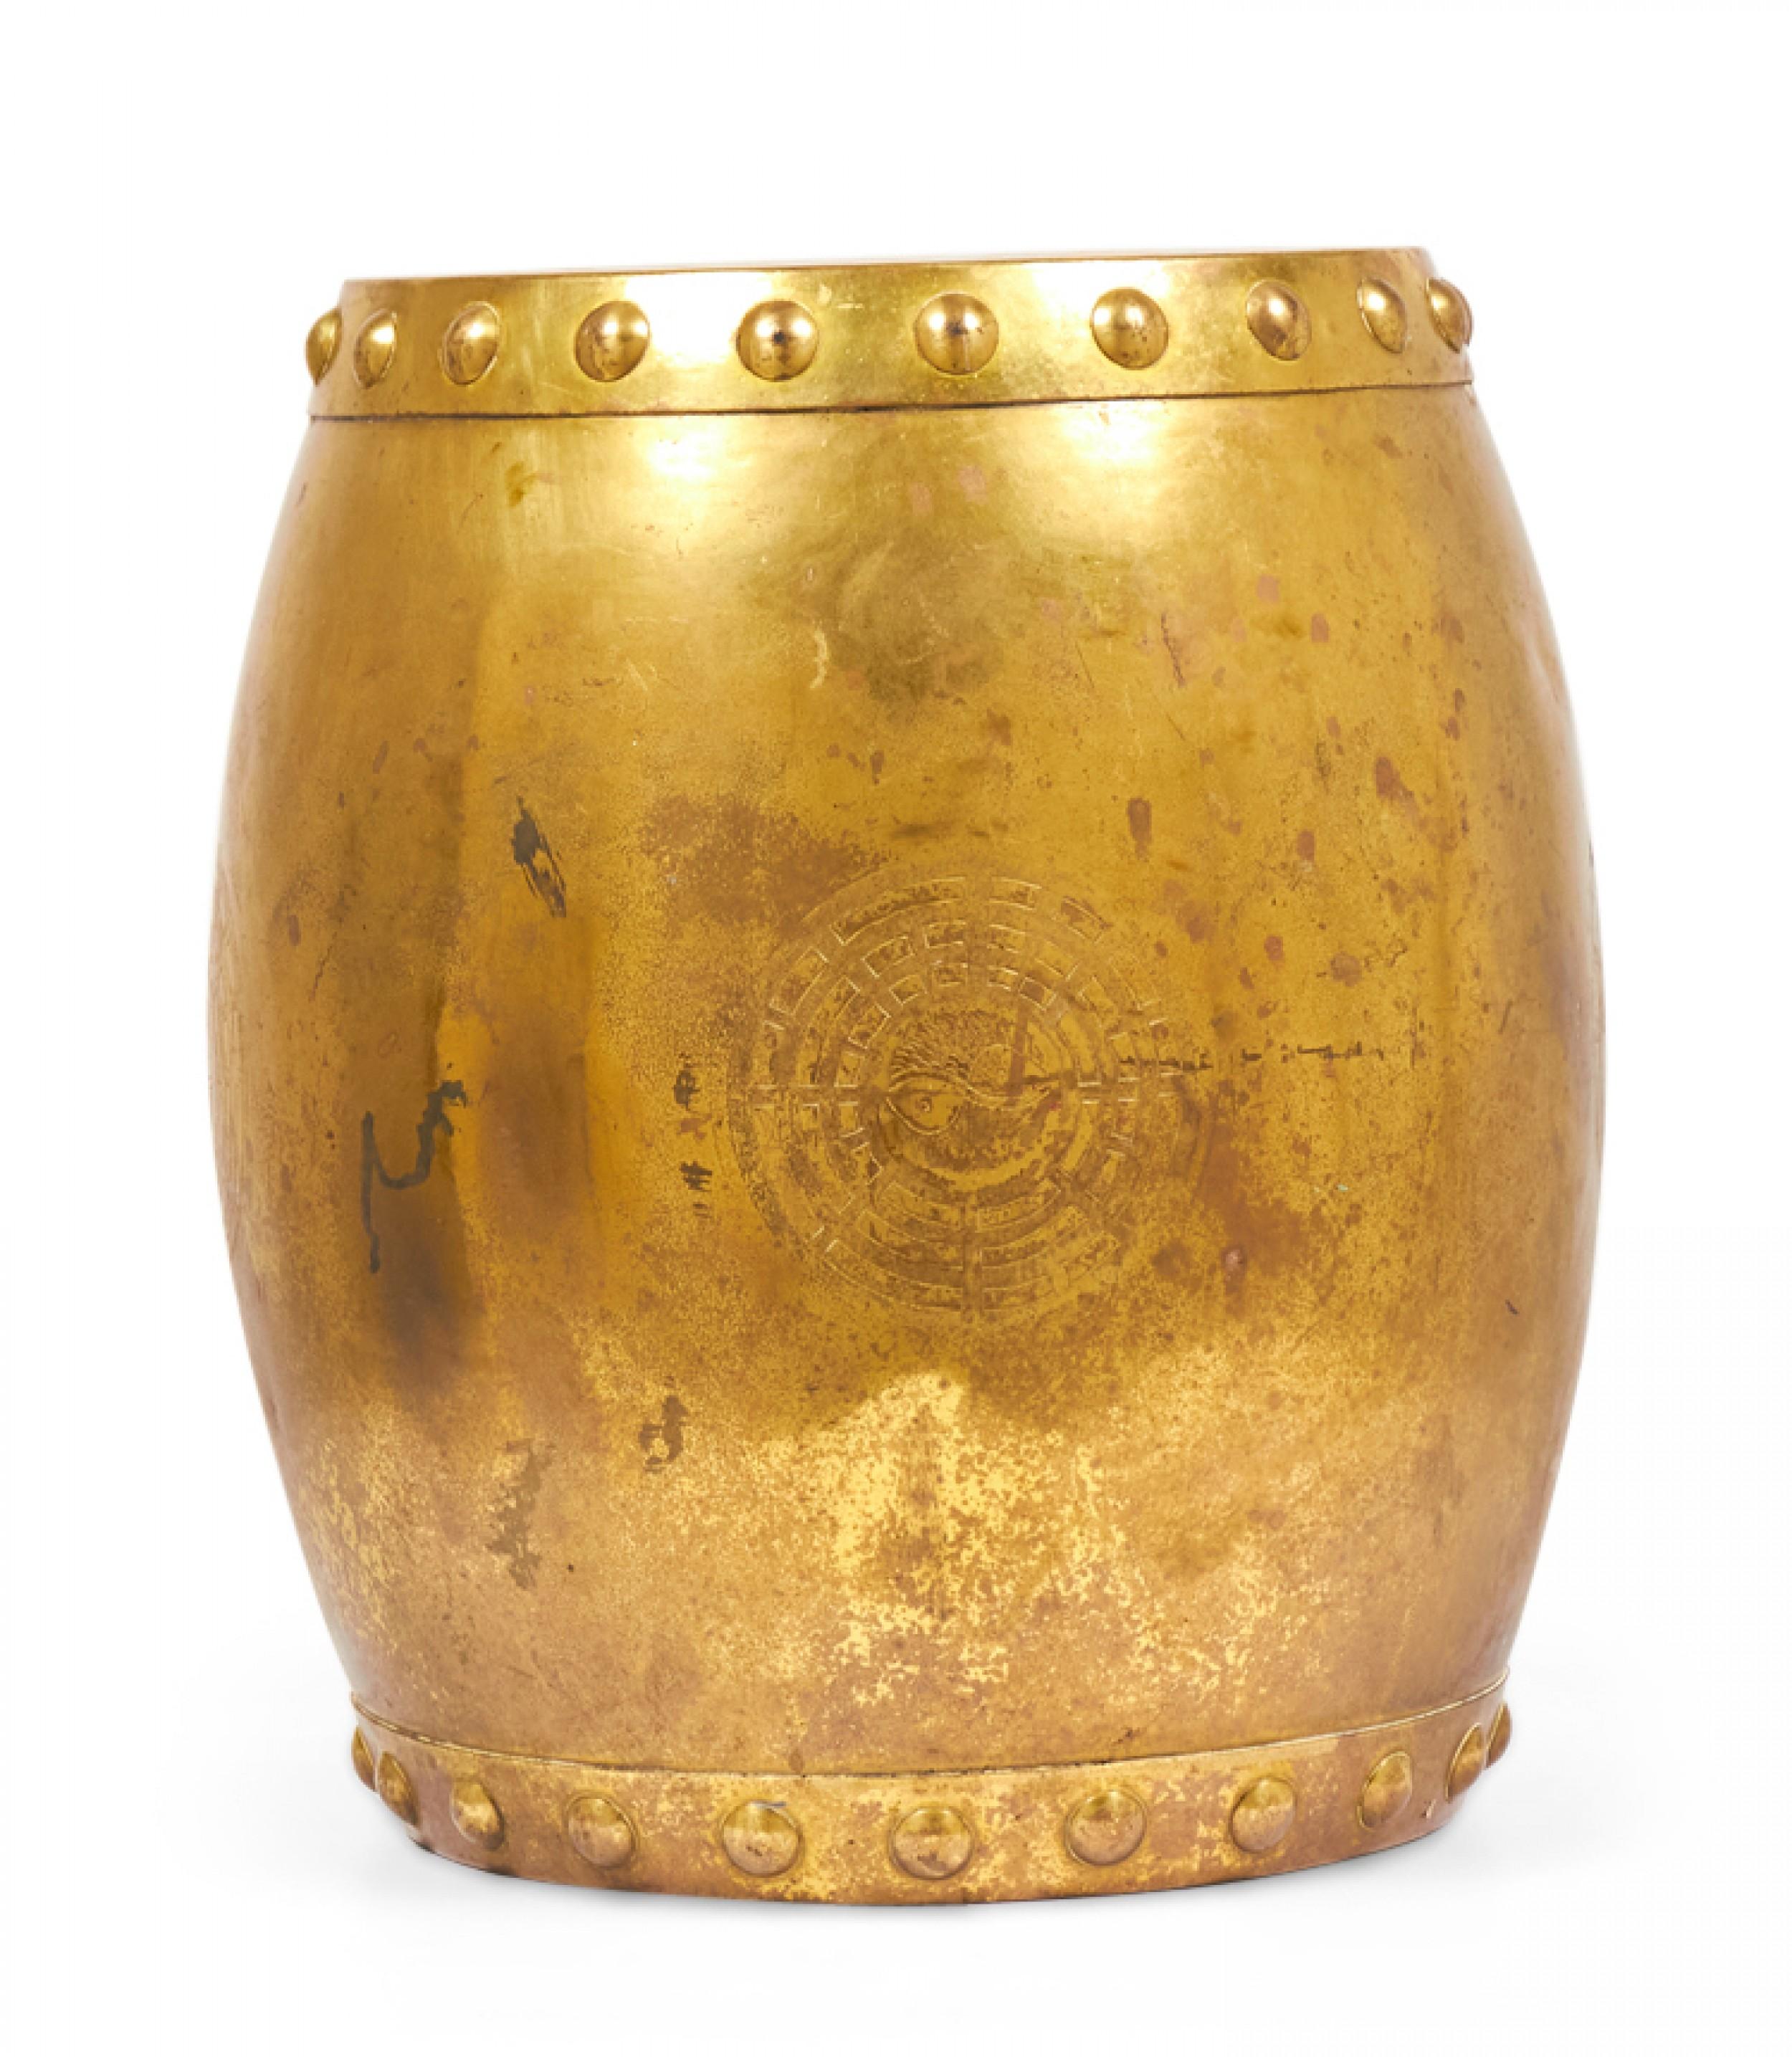 Chinese gilt metal drum-form garden seat with a band of circular studs around the top and bottom and an incised decorative yin and yang symbol.